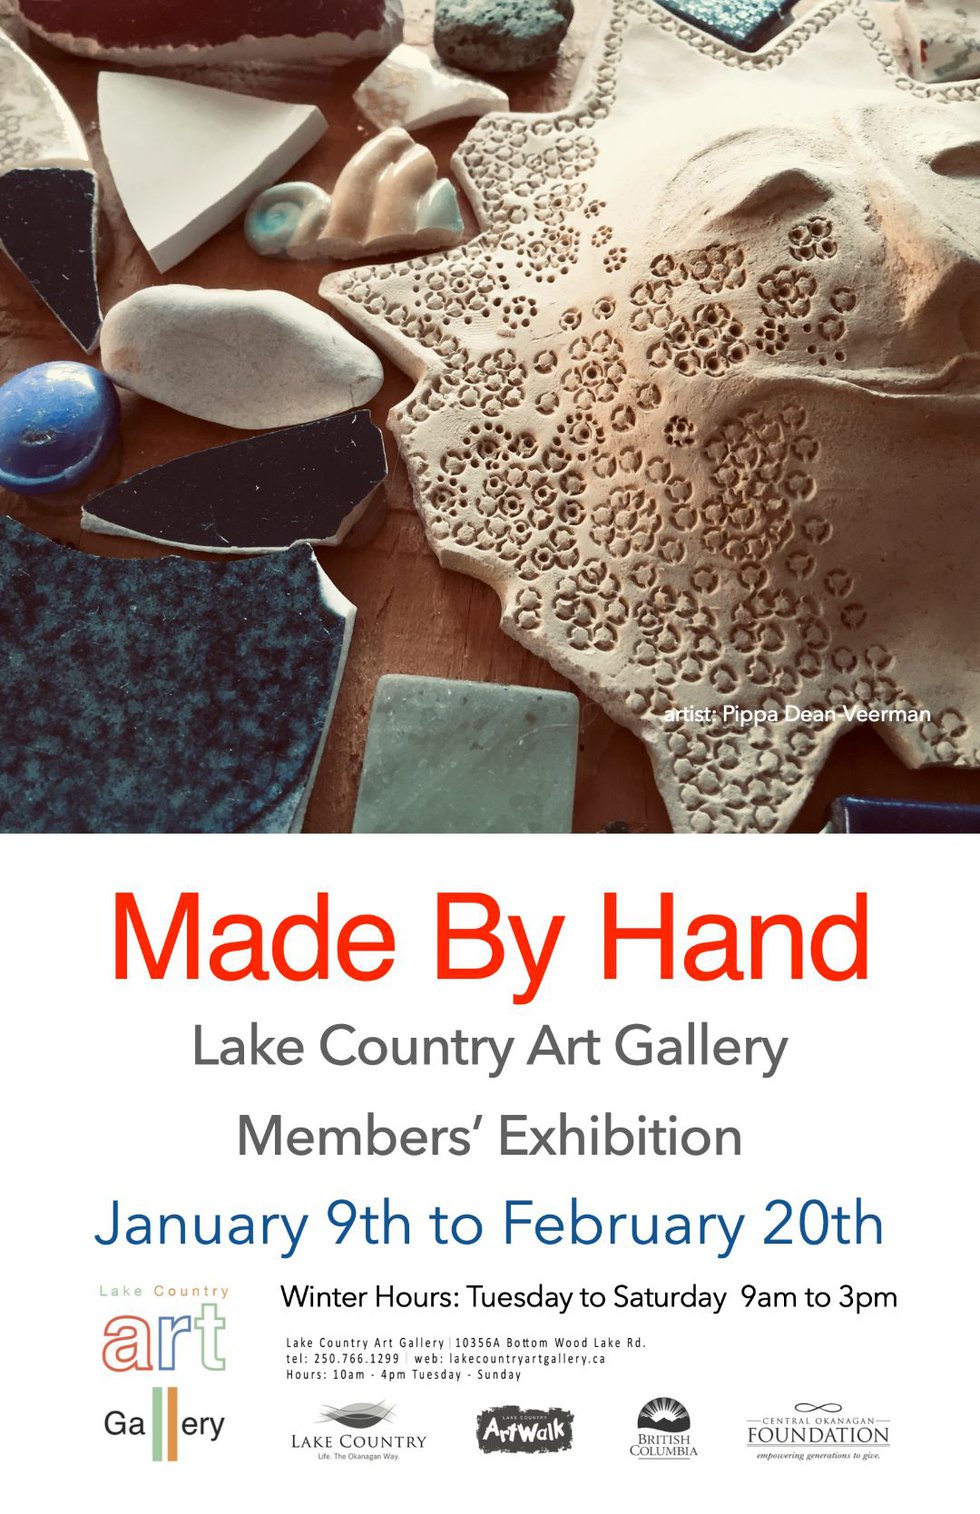 Lake Country Art Gallery, "Made By Hand," 2021